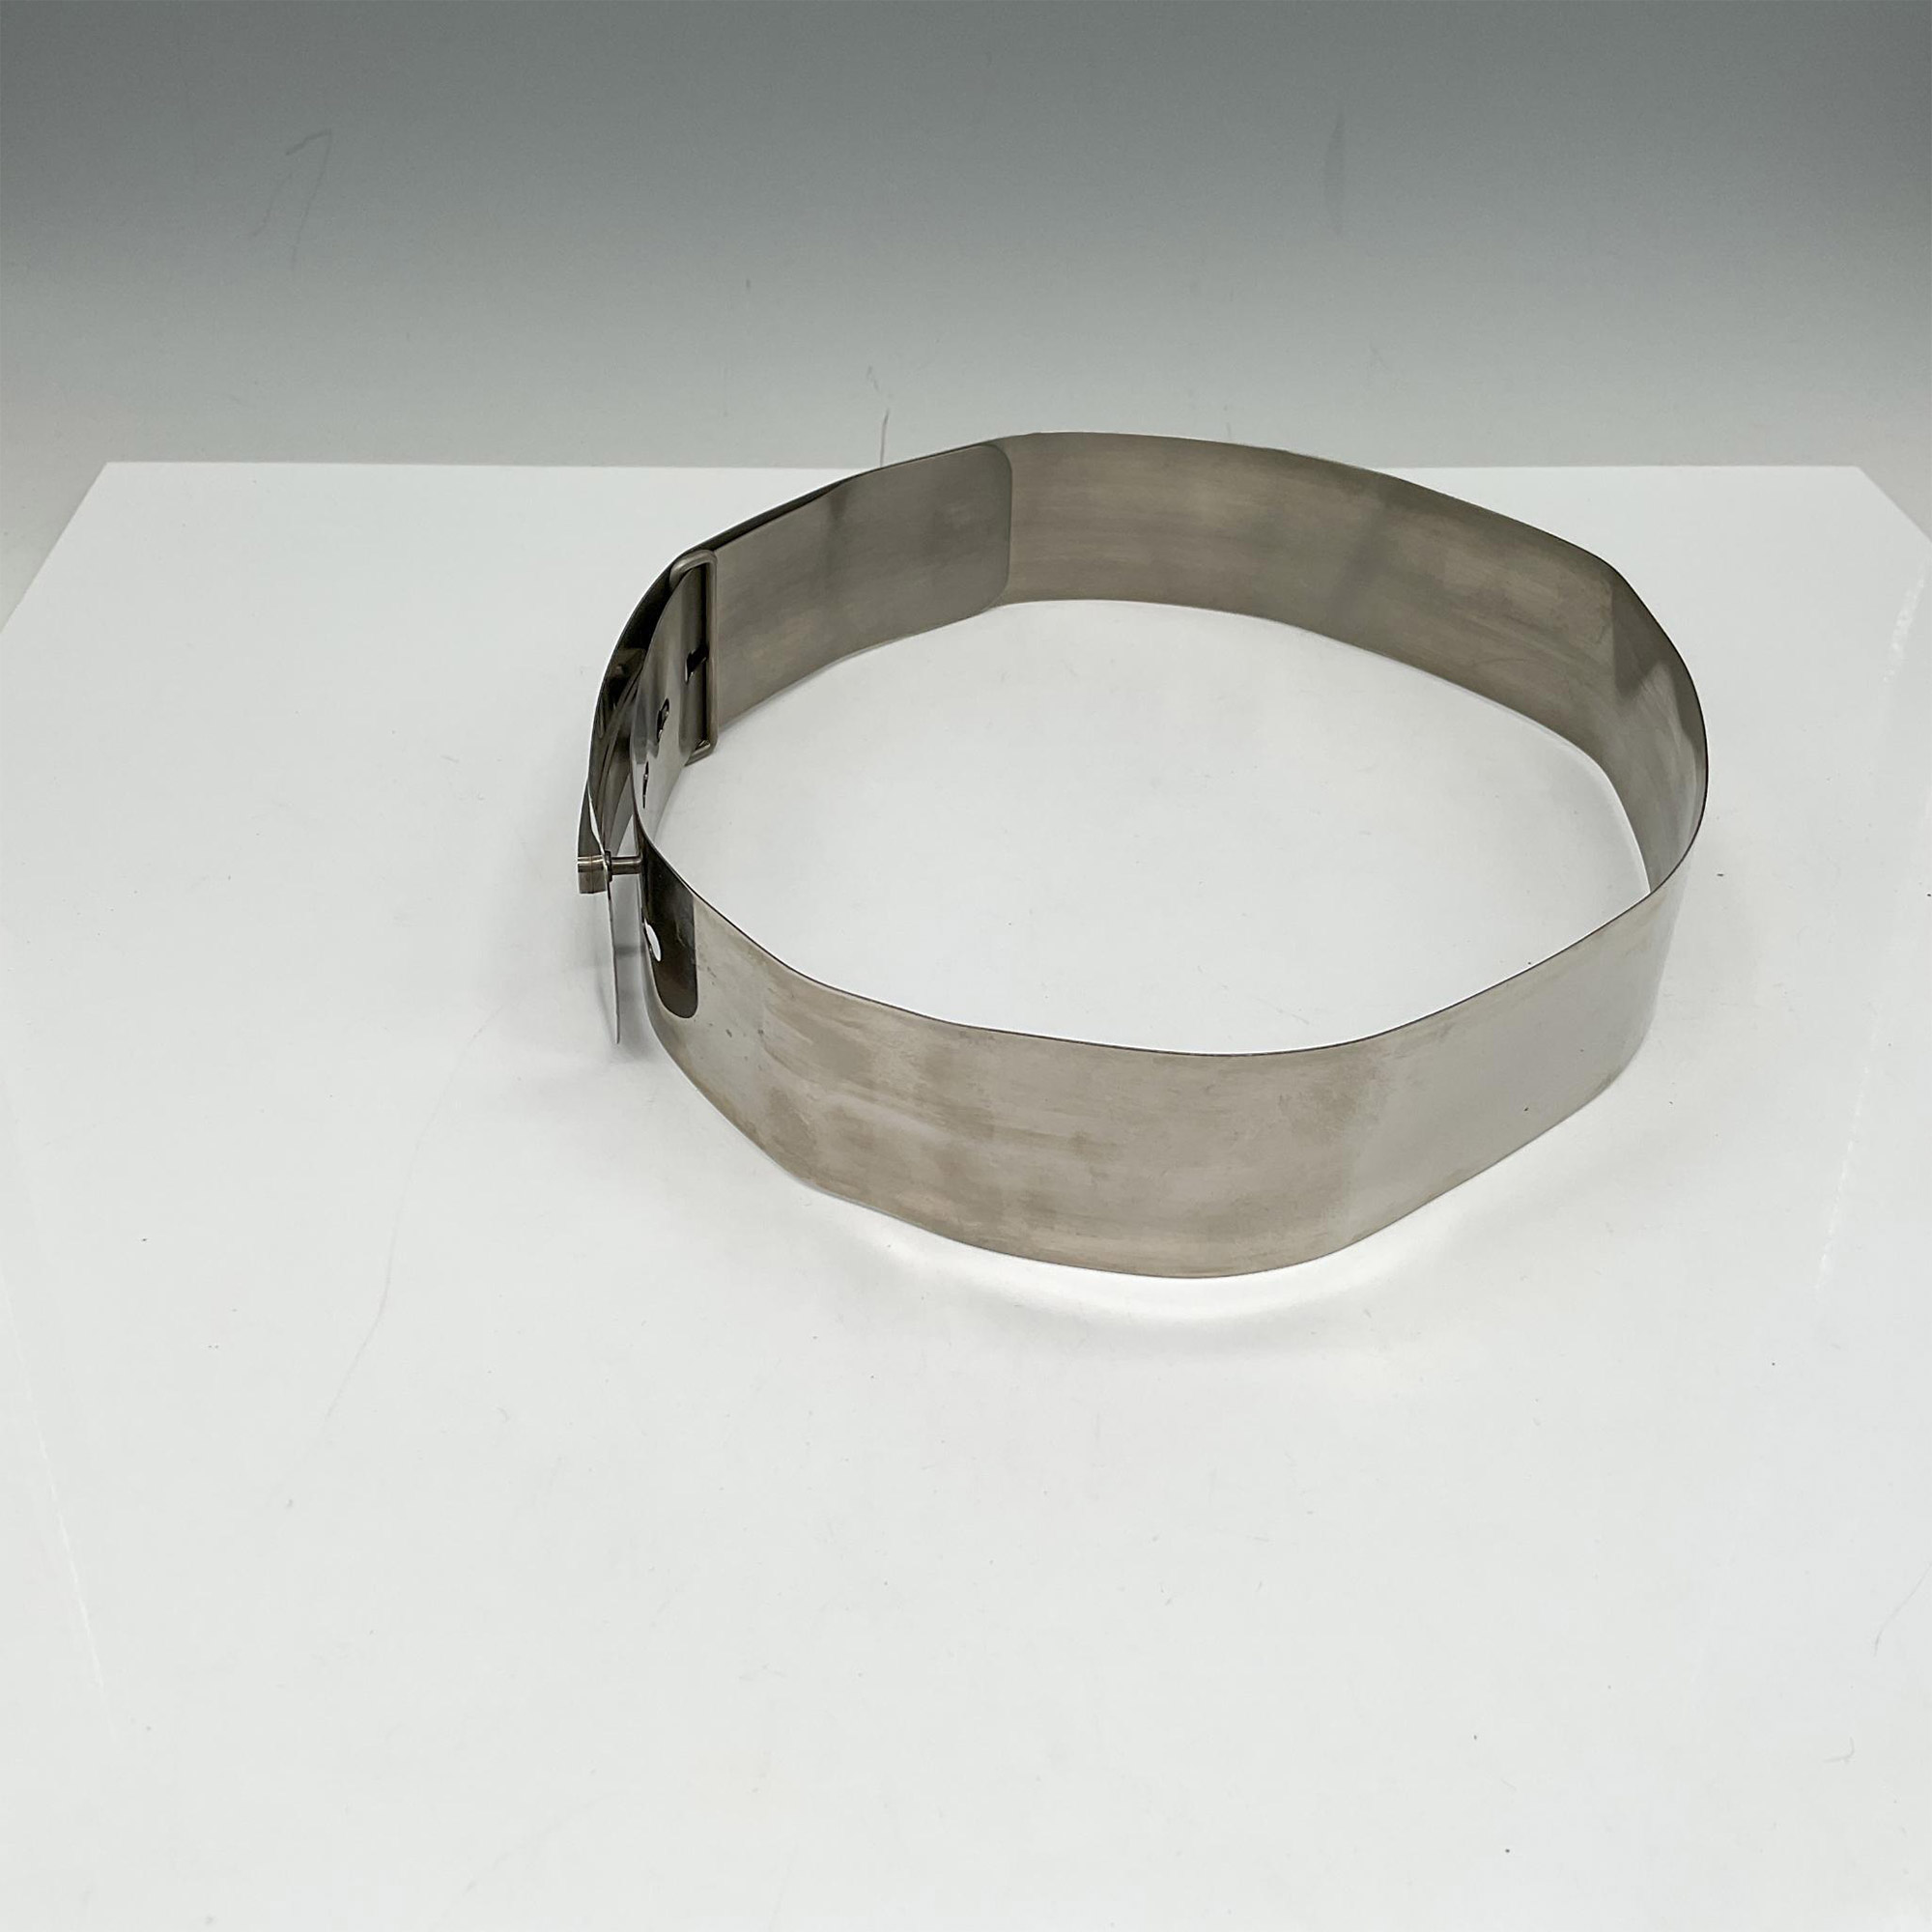 Versace Silver Metal Belt, Size Small - Image 3 of 3